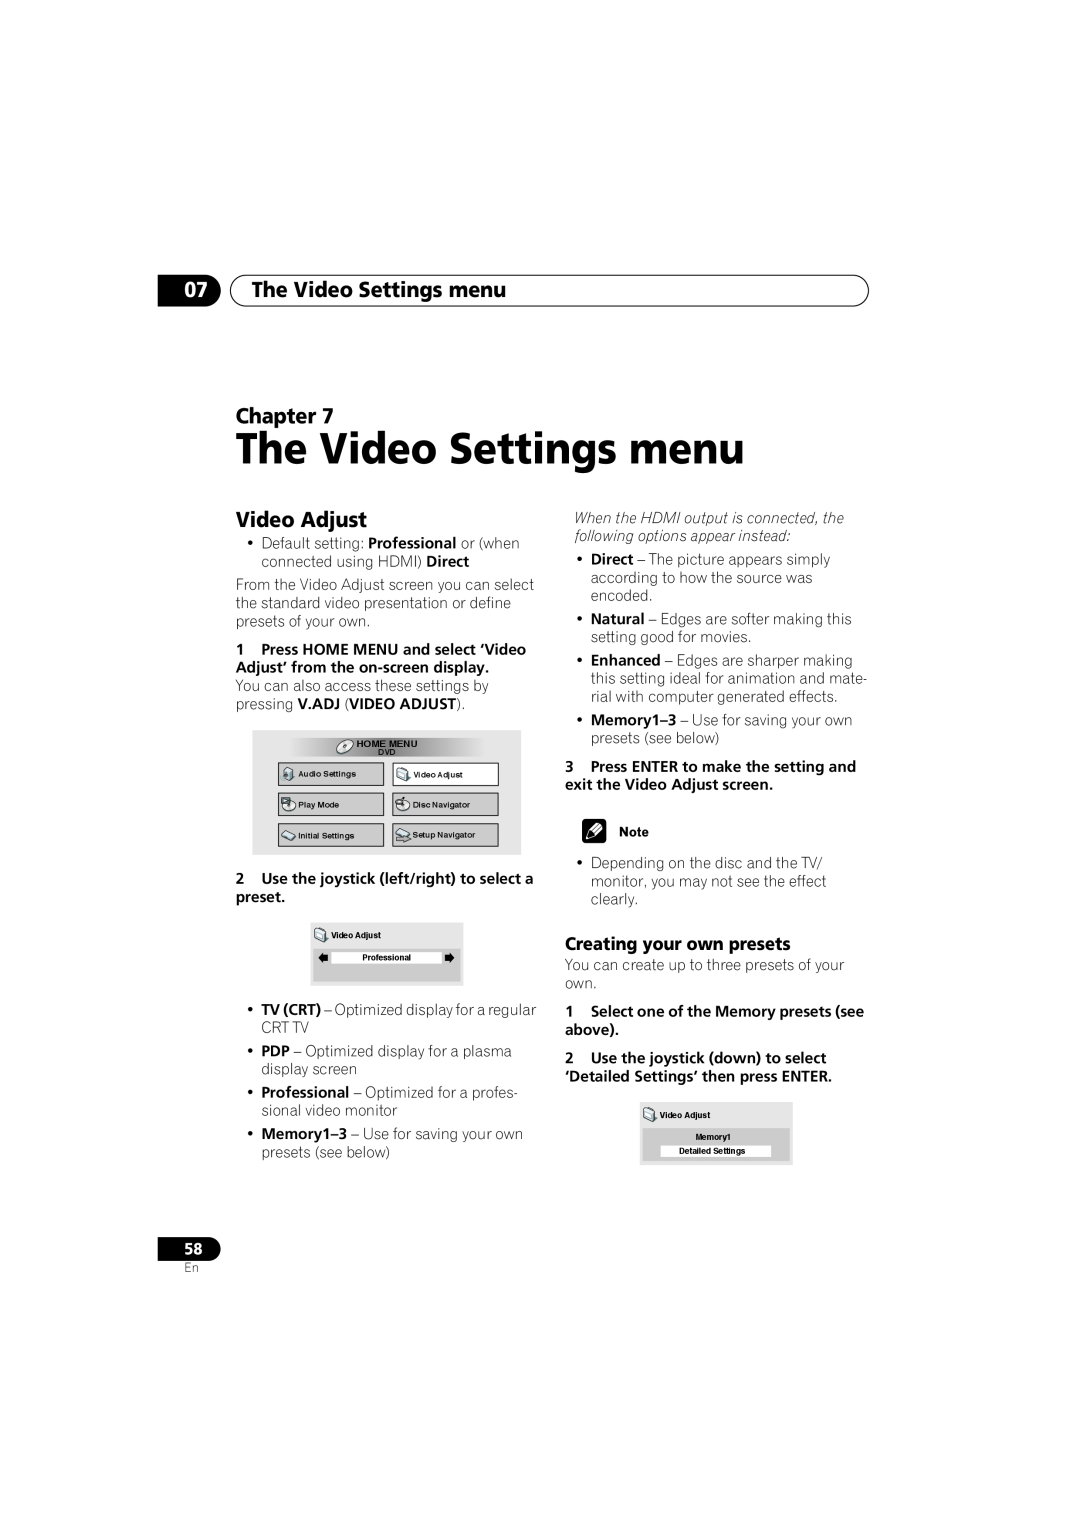 Pioneer DV-79AVi-s operating instructions The Video Settings menu Chapter, Video Adjust, Creating your own presets 